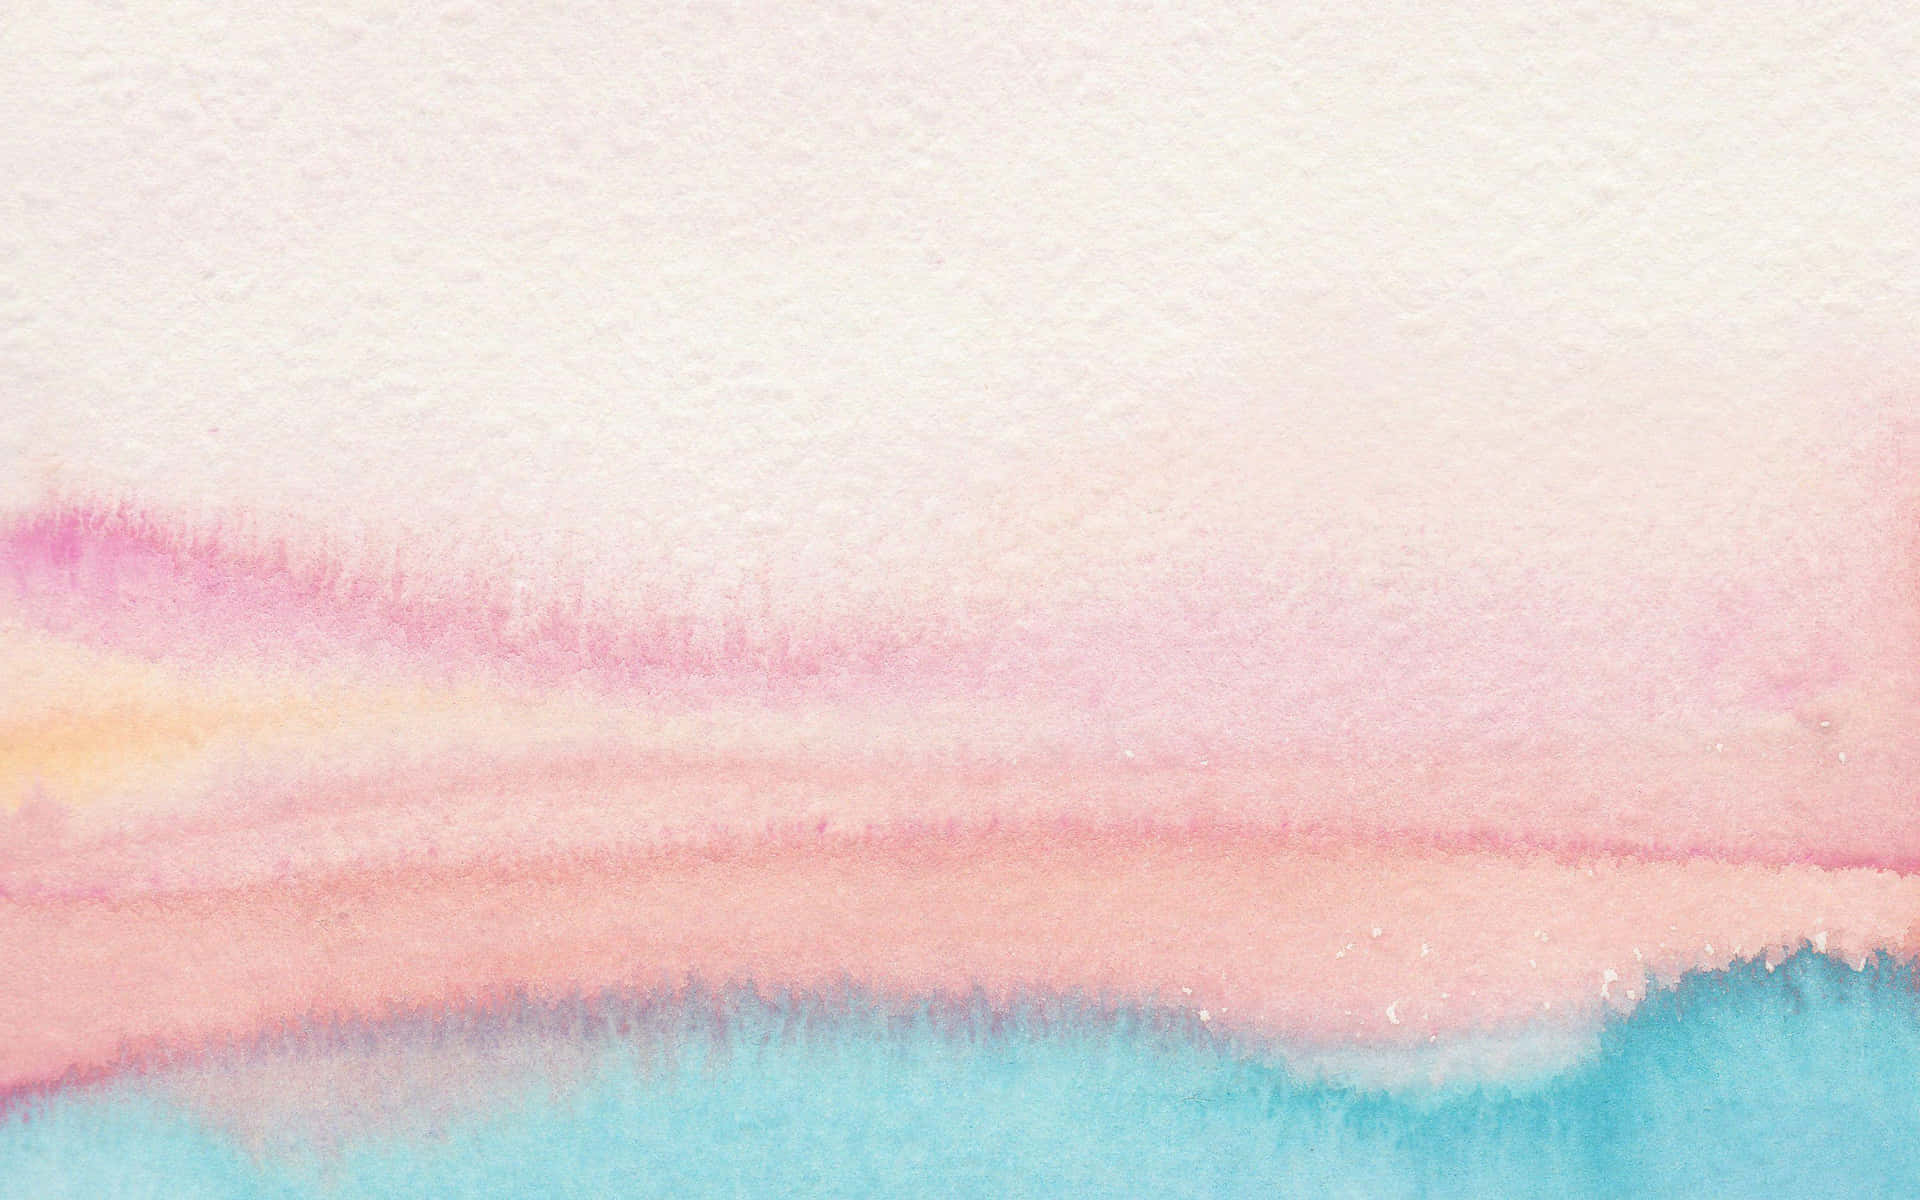 Delicate Pink Watercolor Background